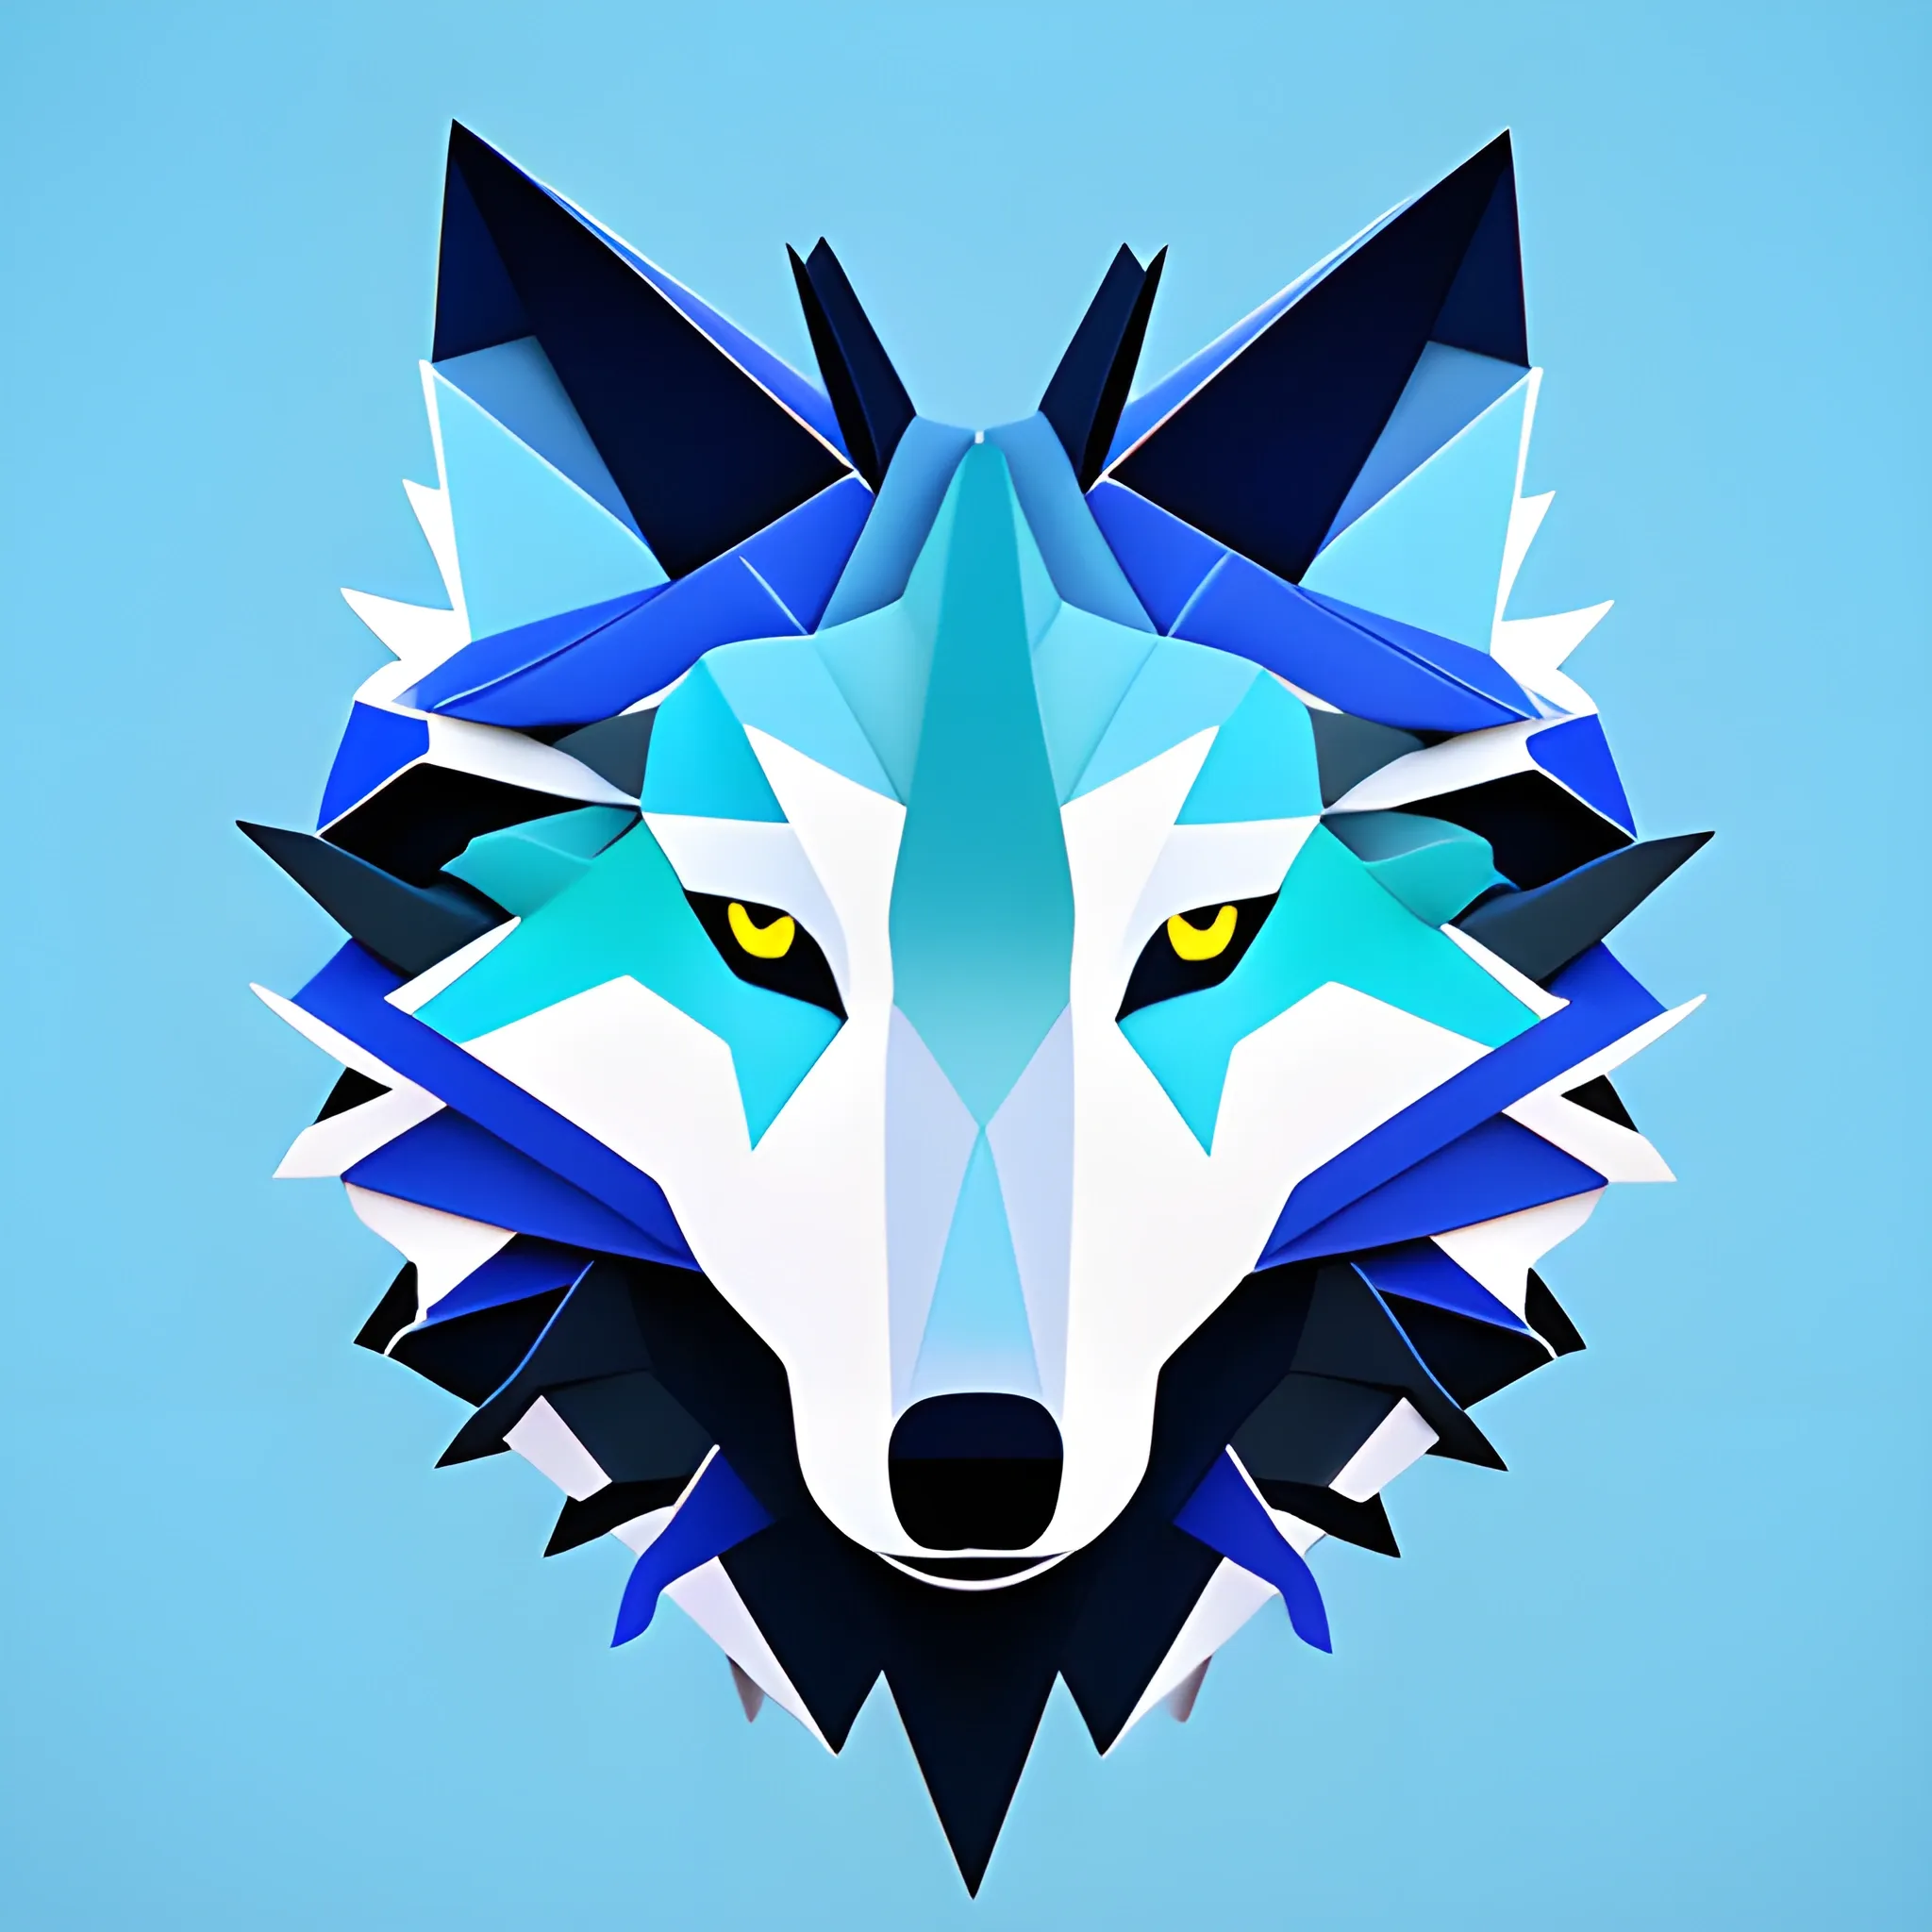 a wolf, minimalistic colorful organic forms, energy, assembled, layered, depth, alive vibrant, 3D, abstract, on a light blue background 